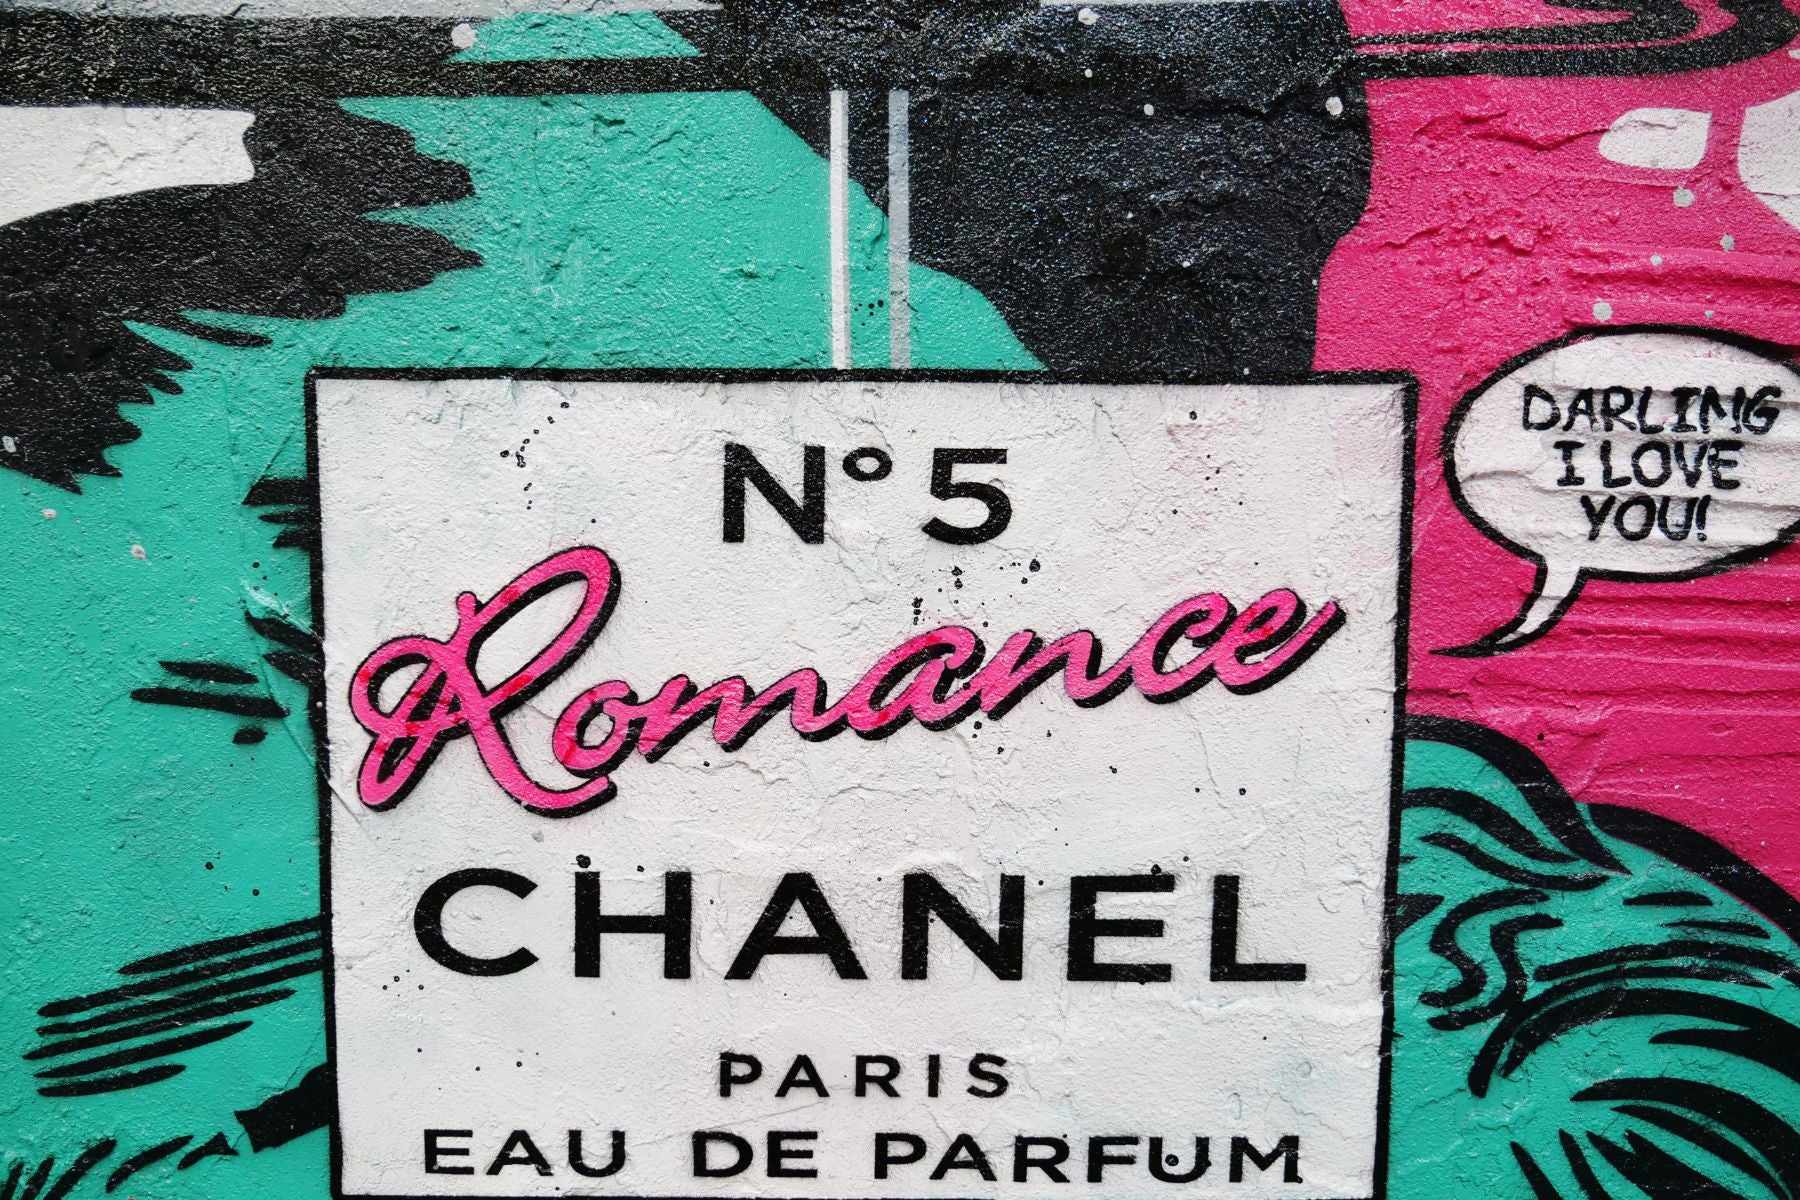 Fluro Romance 120cm x 150cm Industrial Concrete Urban Pop Art Painting With Custom Etched Frame (SOLD)